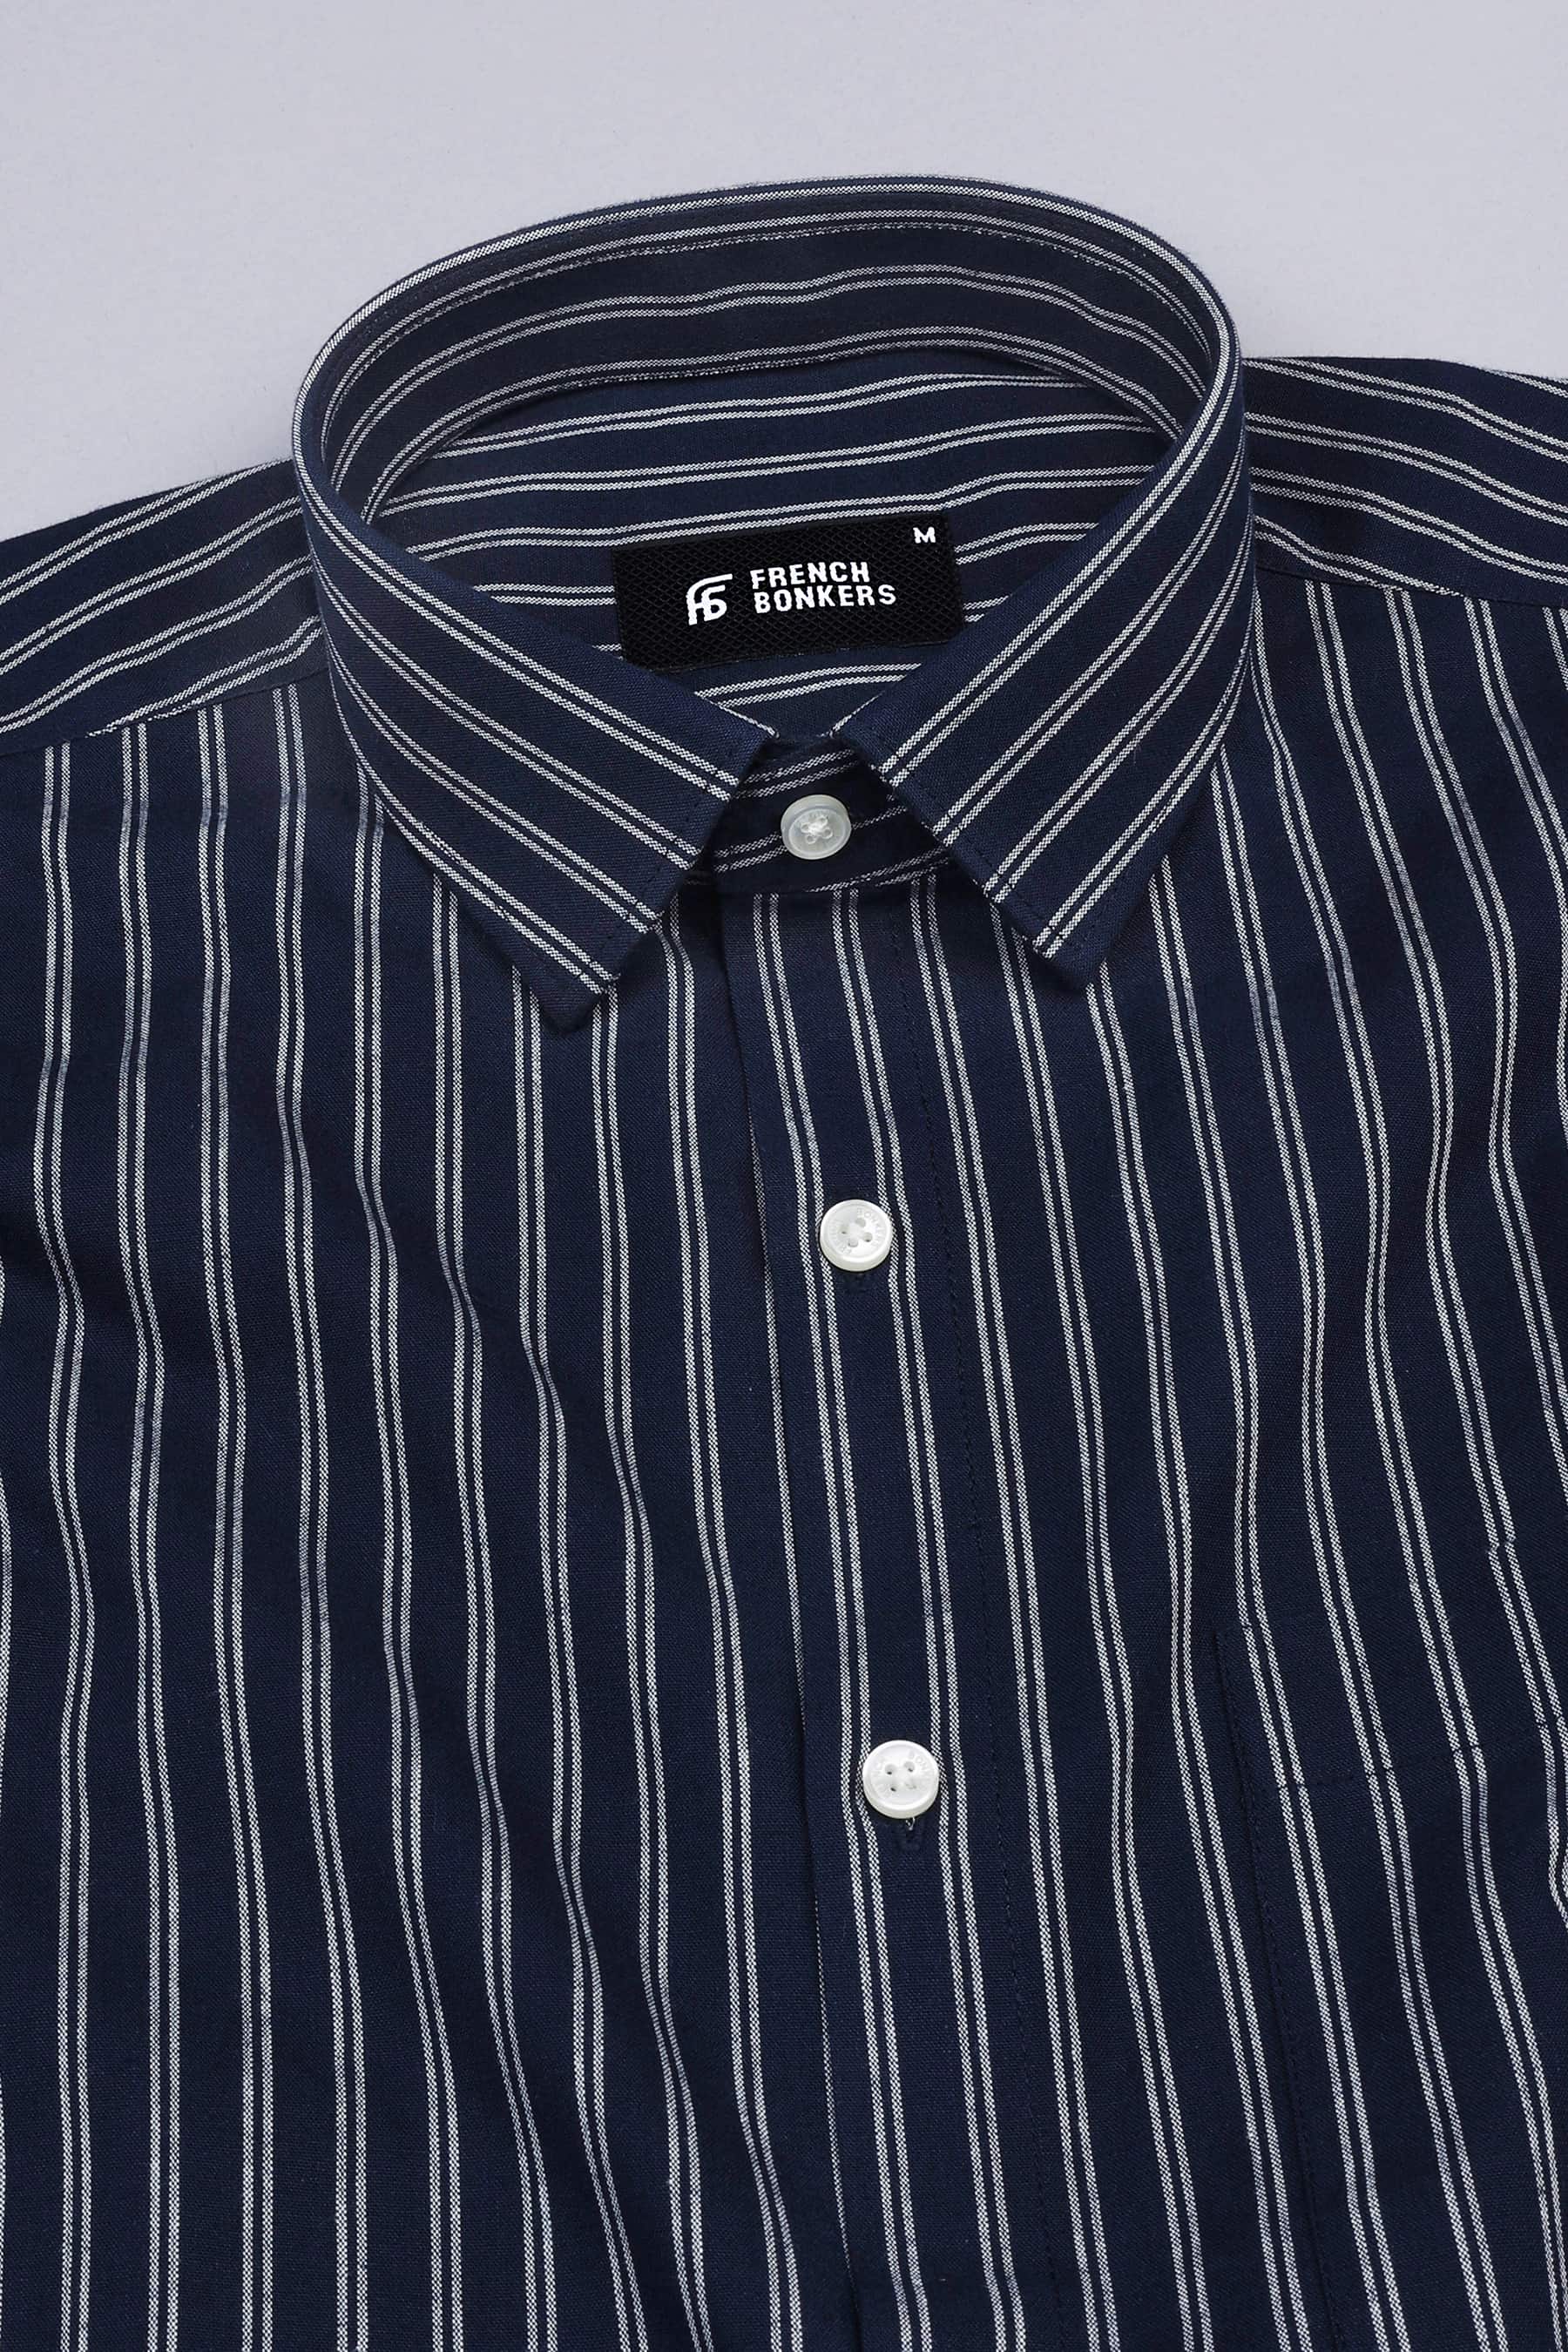 Astros navy blue with white double line regency stripe shirt